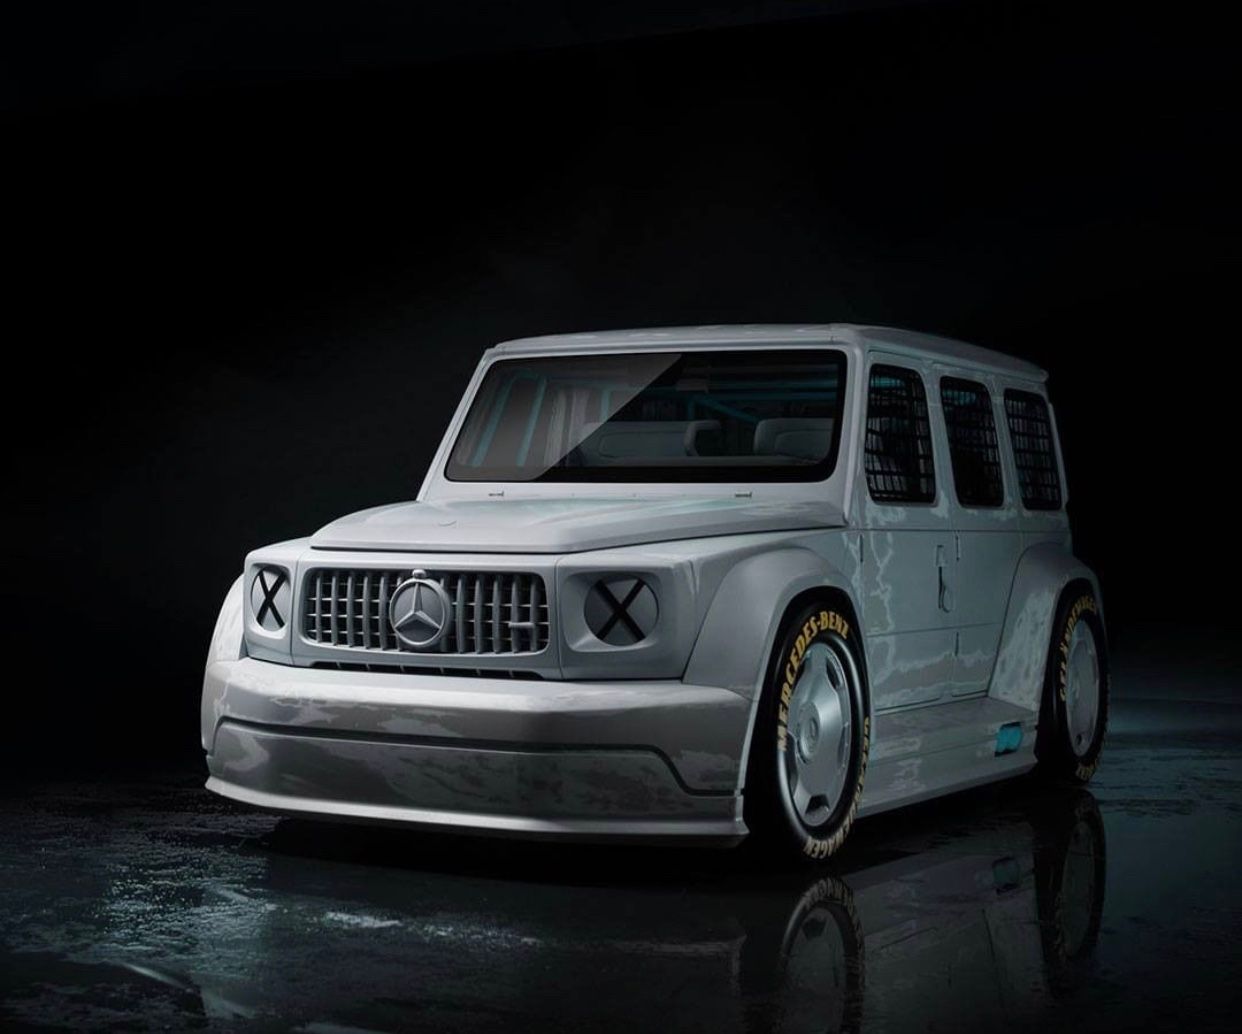 Virgil Abloh and Mercedes G-Class Collaboration Revealed